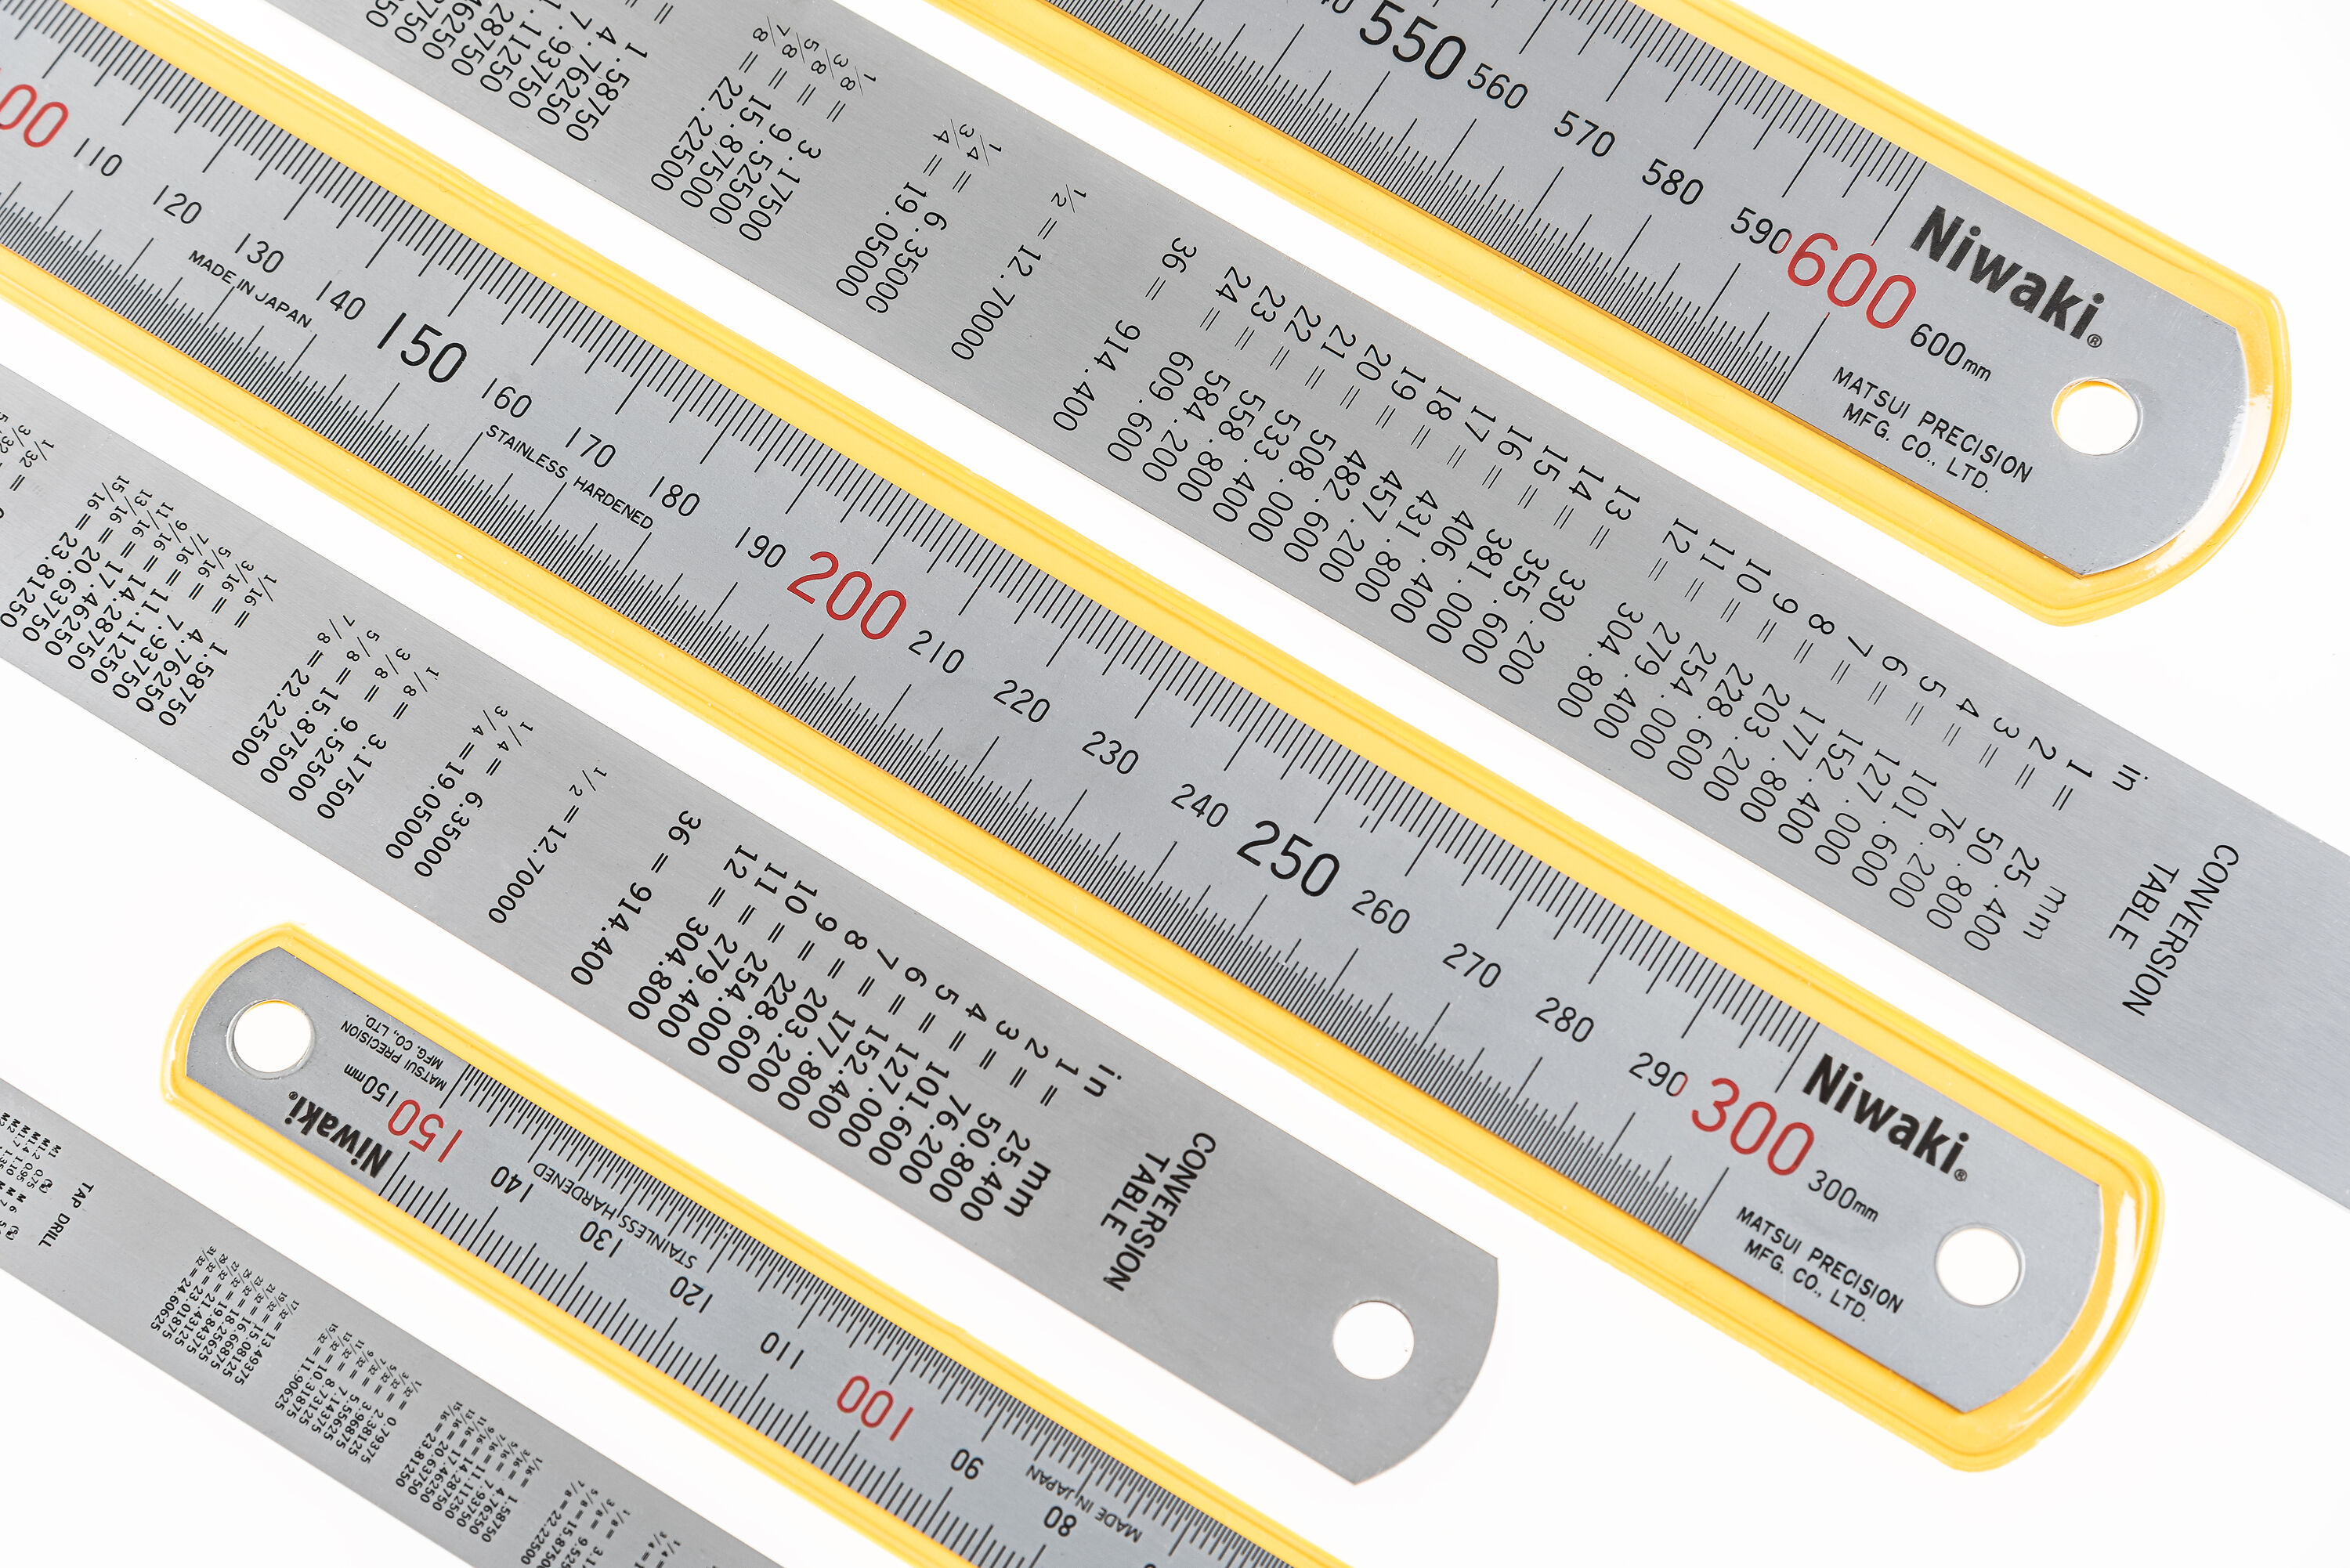 Matsui Stainless Steel Rulers 150mm 300mm 600mm